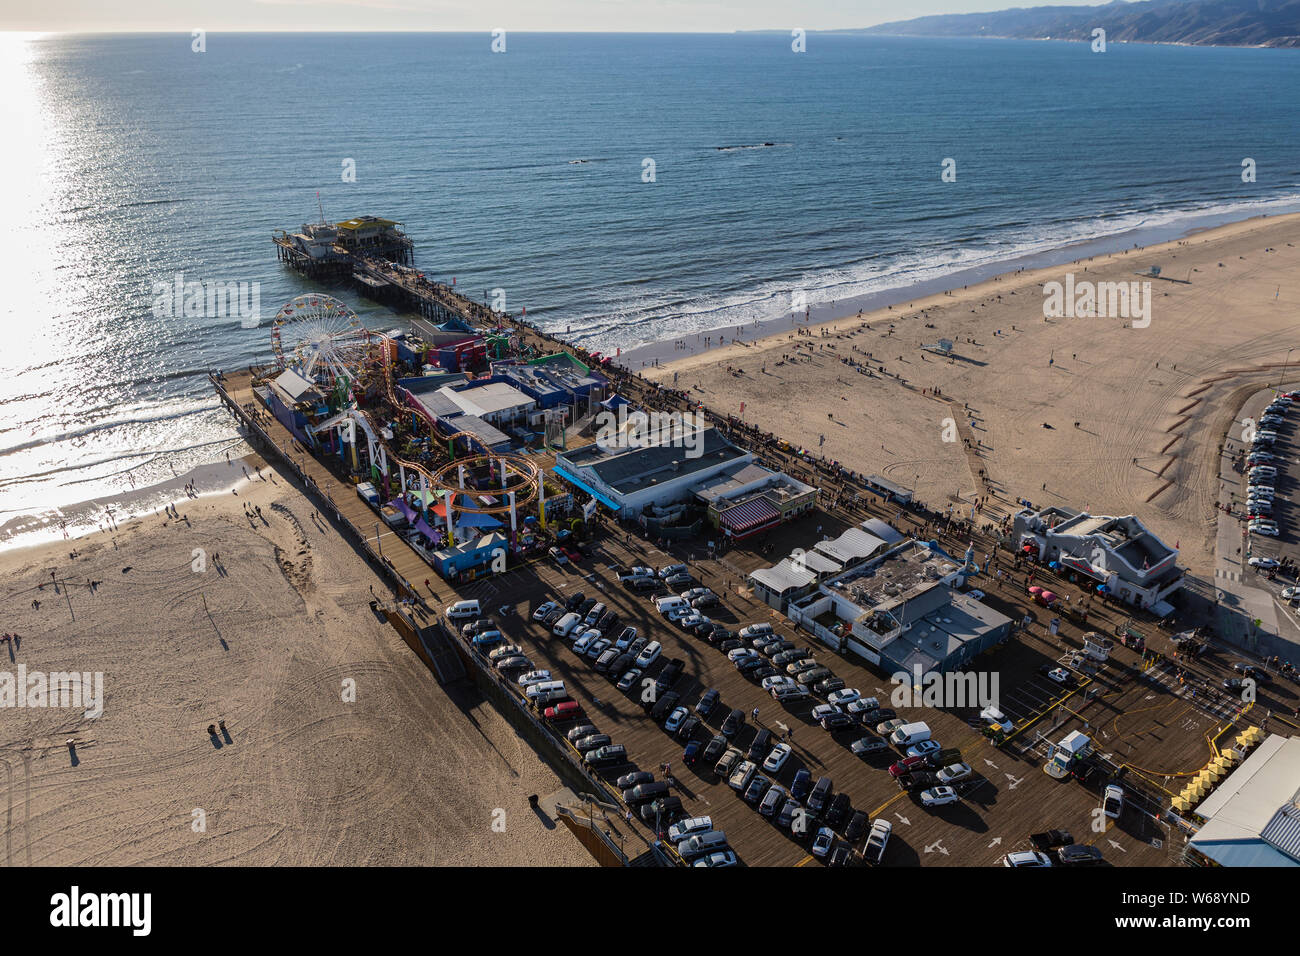 Santa Monica, California, USA - December 17, 2016:  Afternoon aerial view of famous Santa Monica Pier and beach on the Los Angeles County coast. Stock Photo